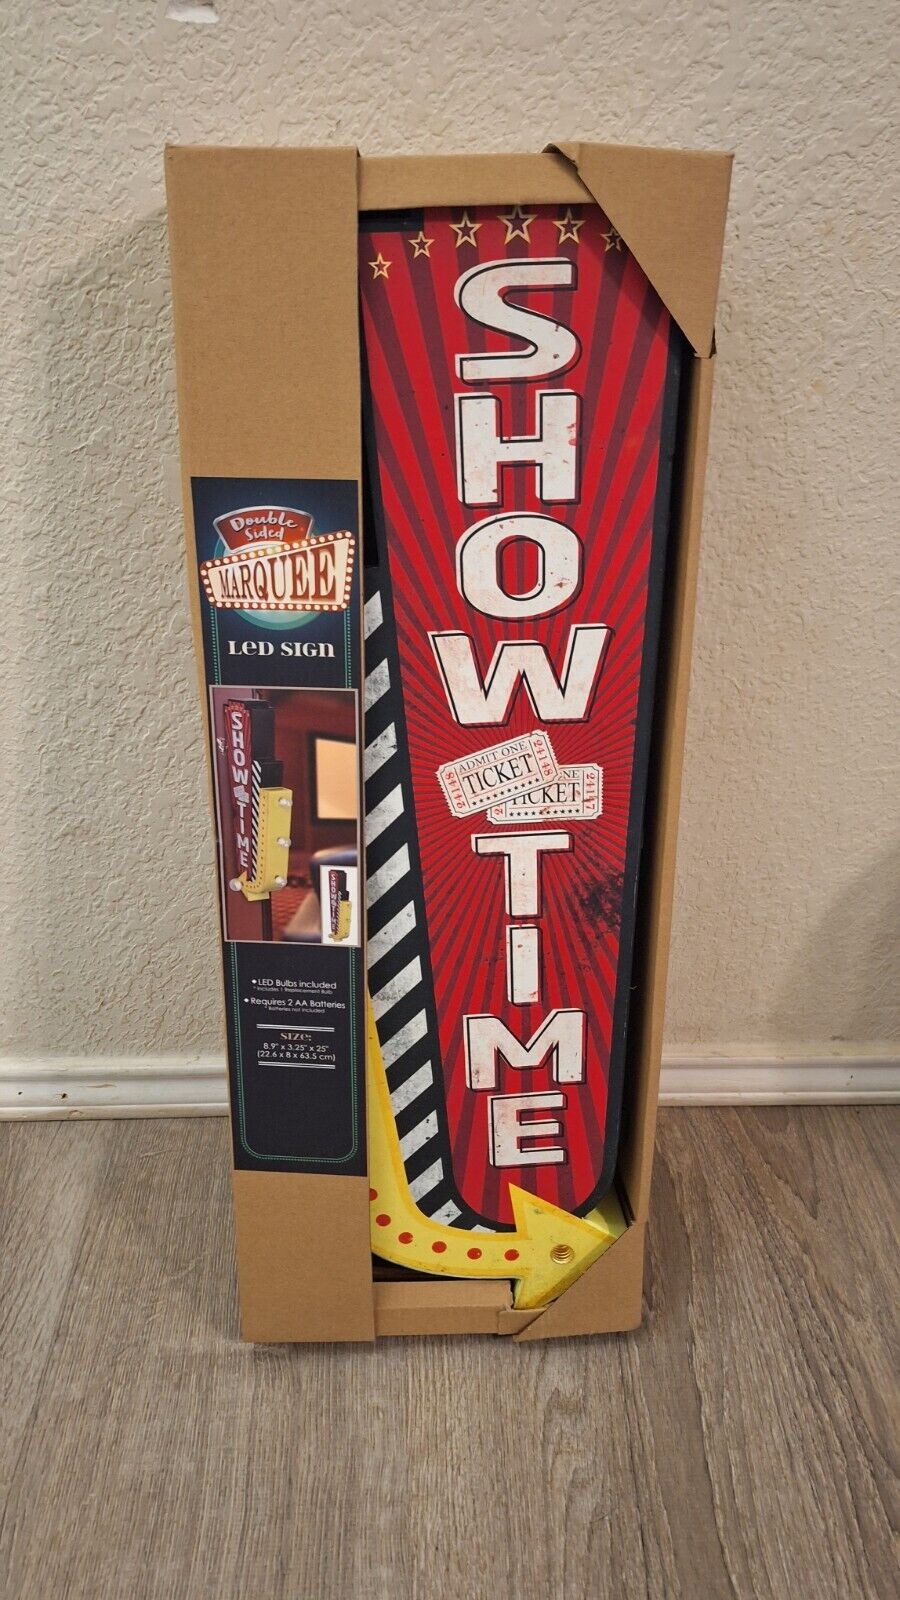 SHOWTIME Light-Up LED Wall Home Cinema Movie Theater Vintage Antique Style Sign